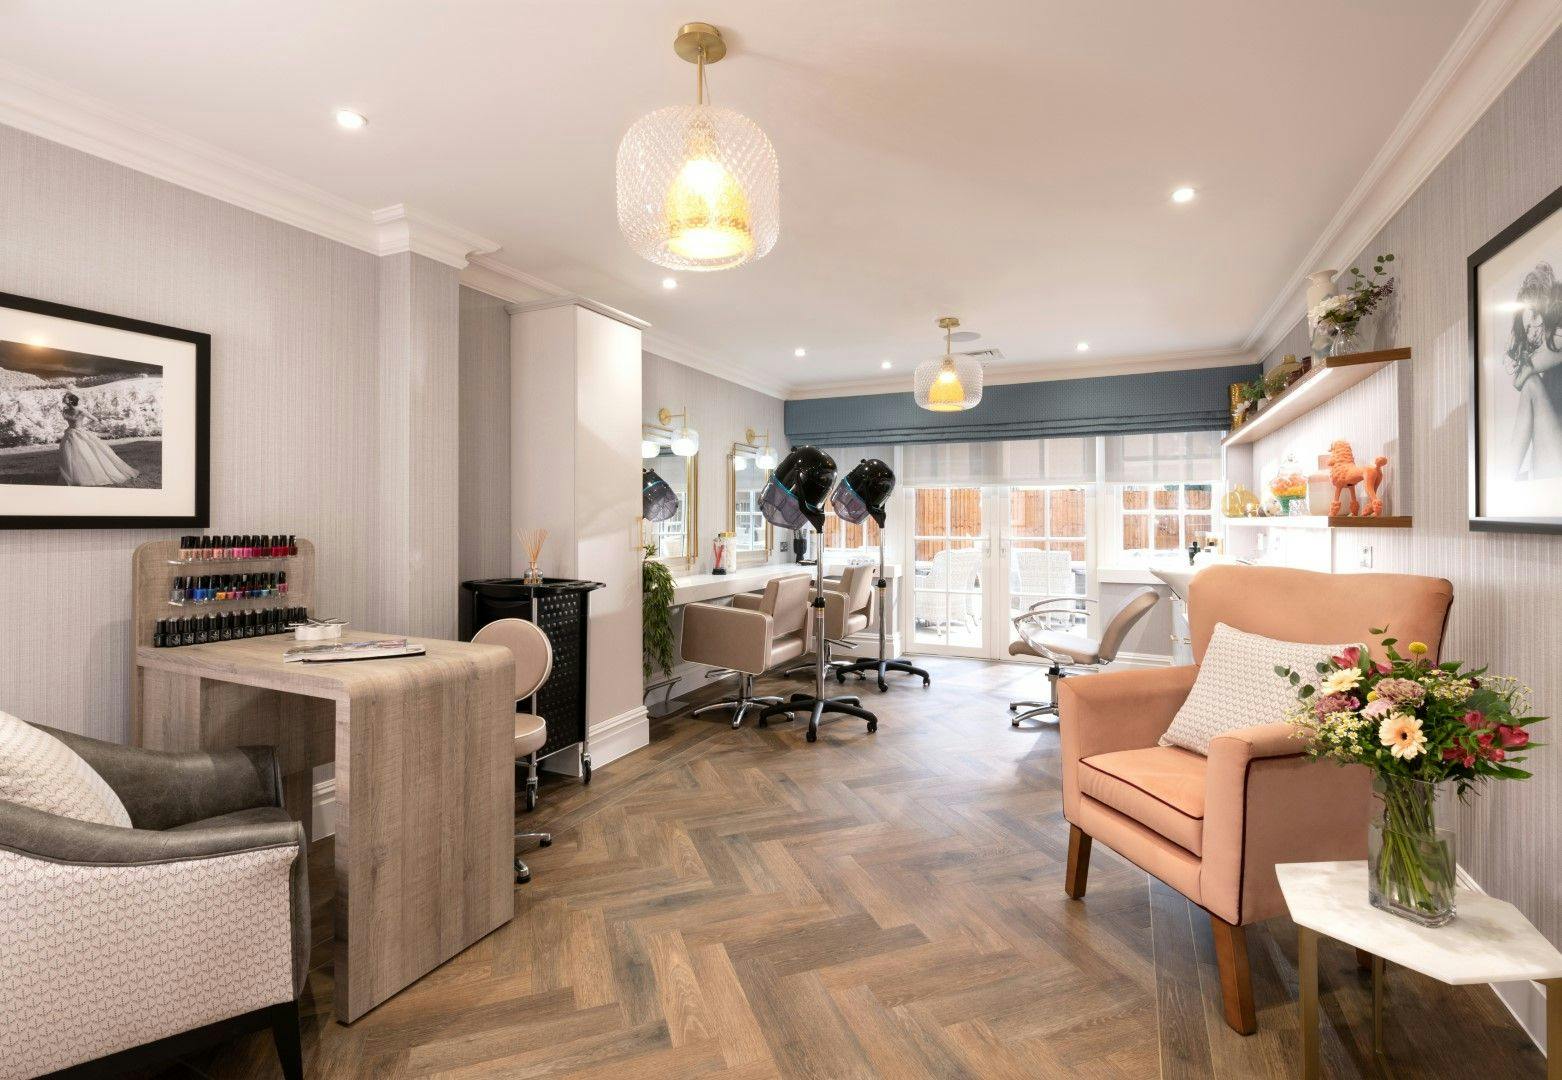 Salon at Hutton View Care Home in Brentwood, Essex